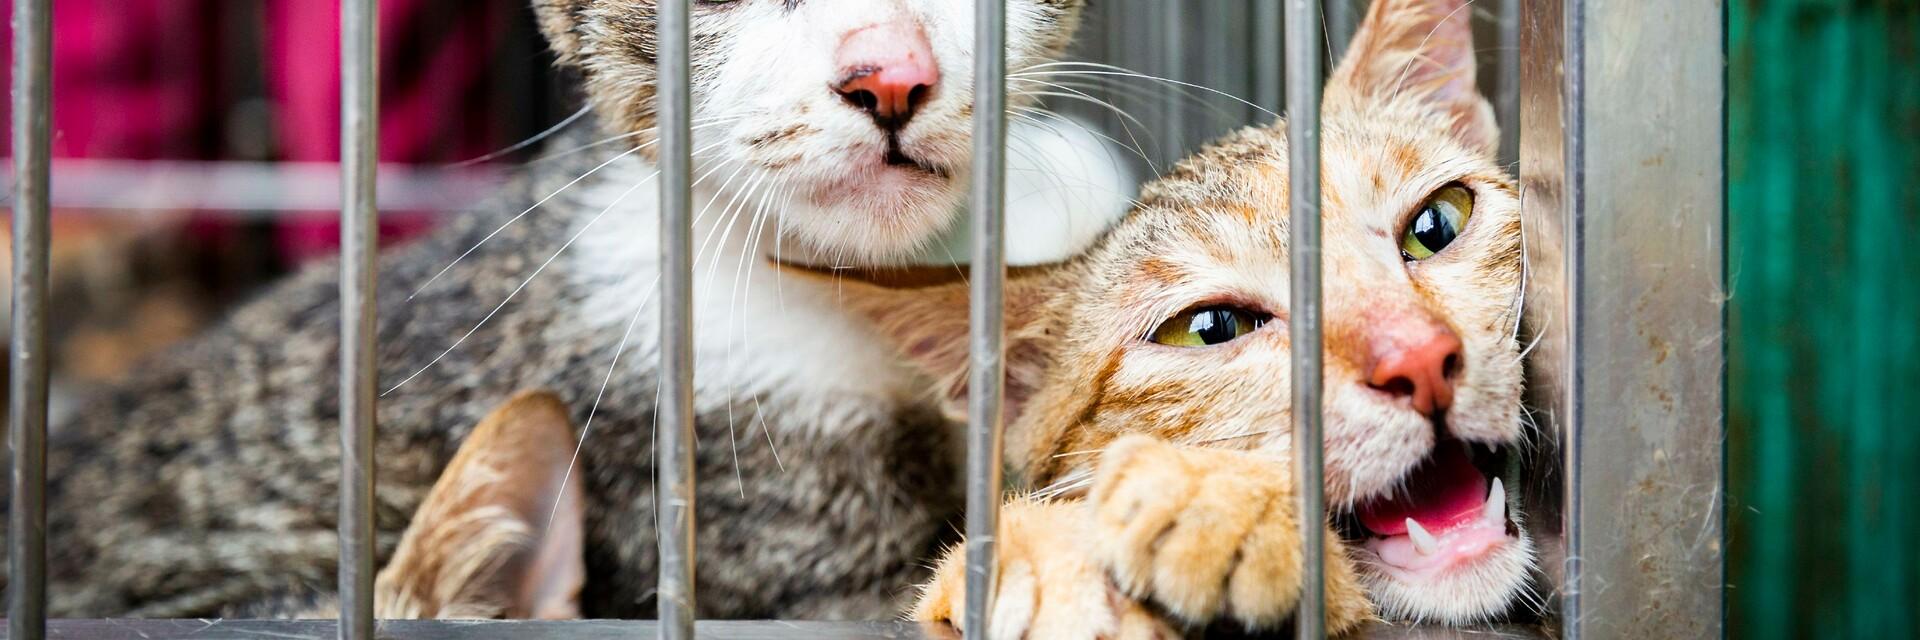 Cats in a cage in Southeast Asia 